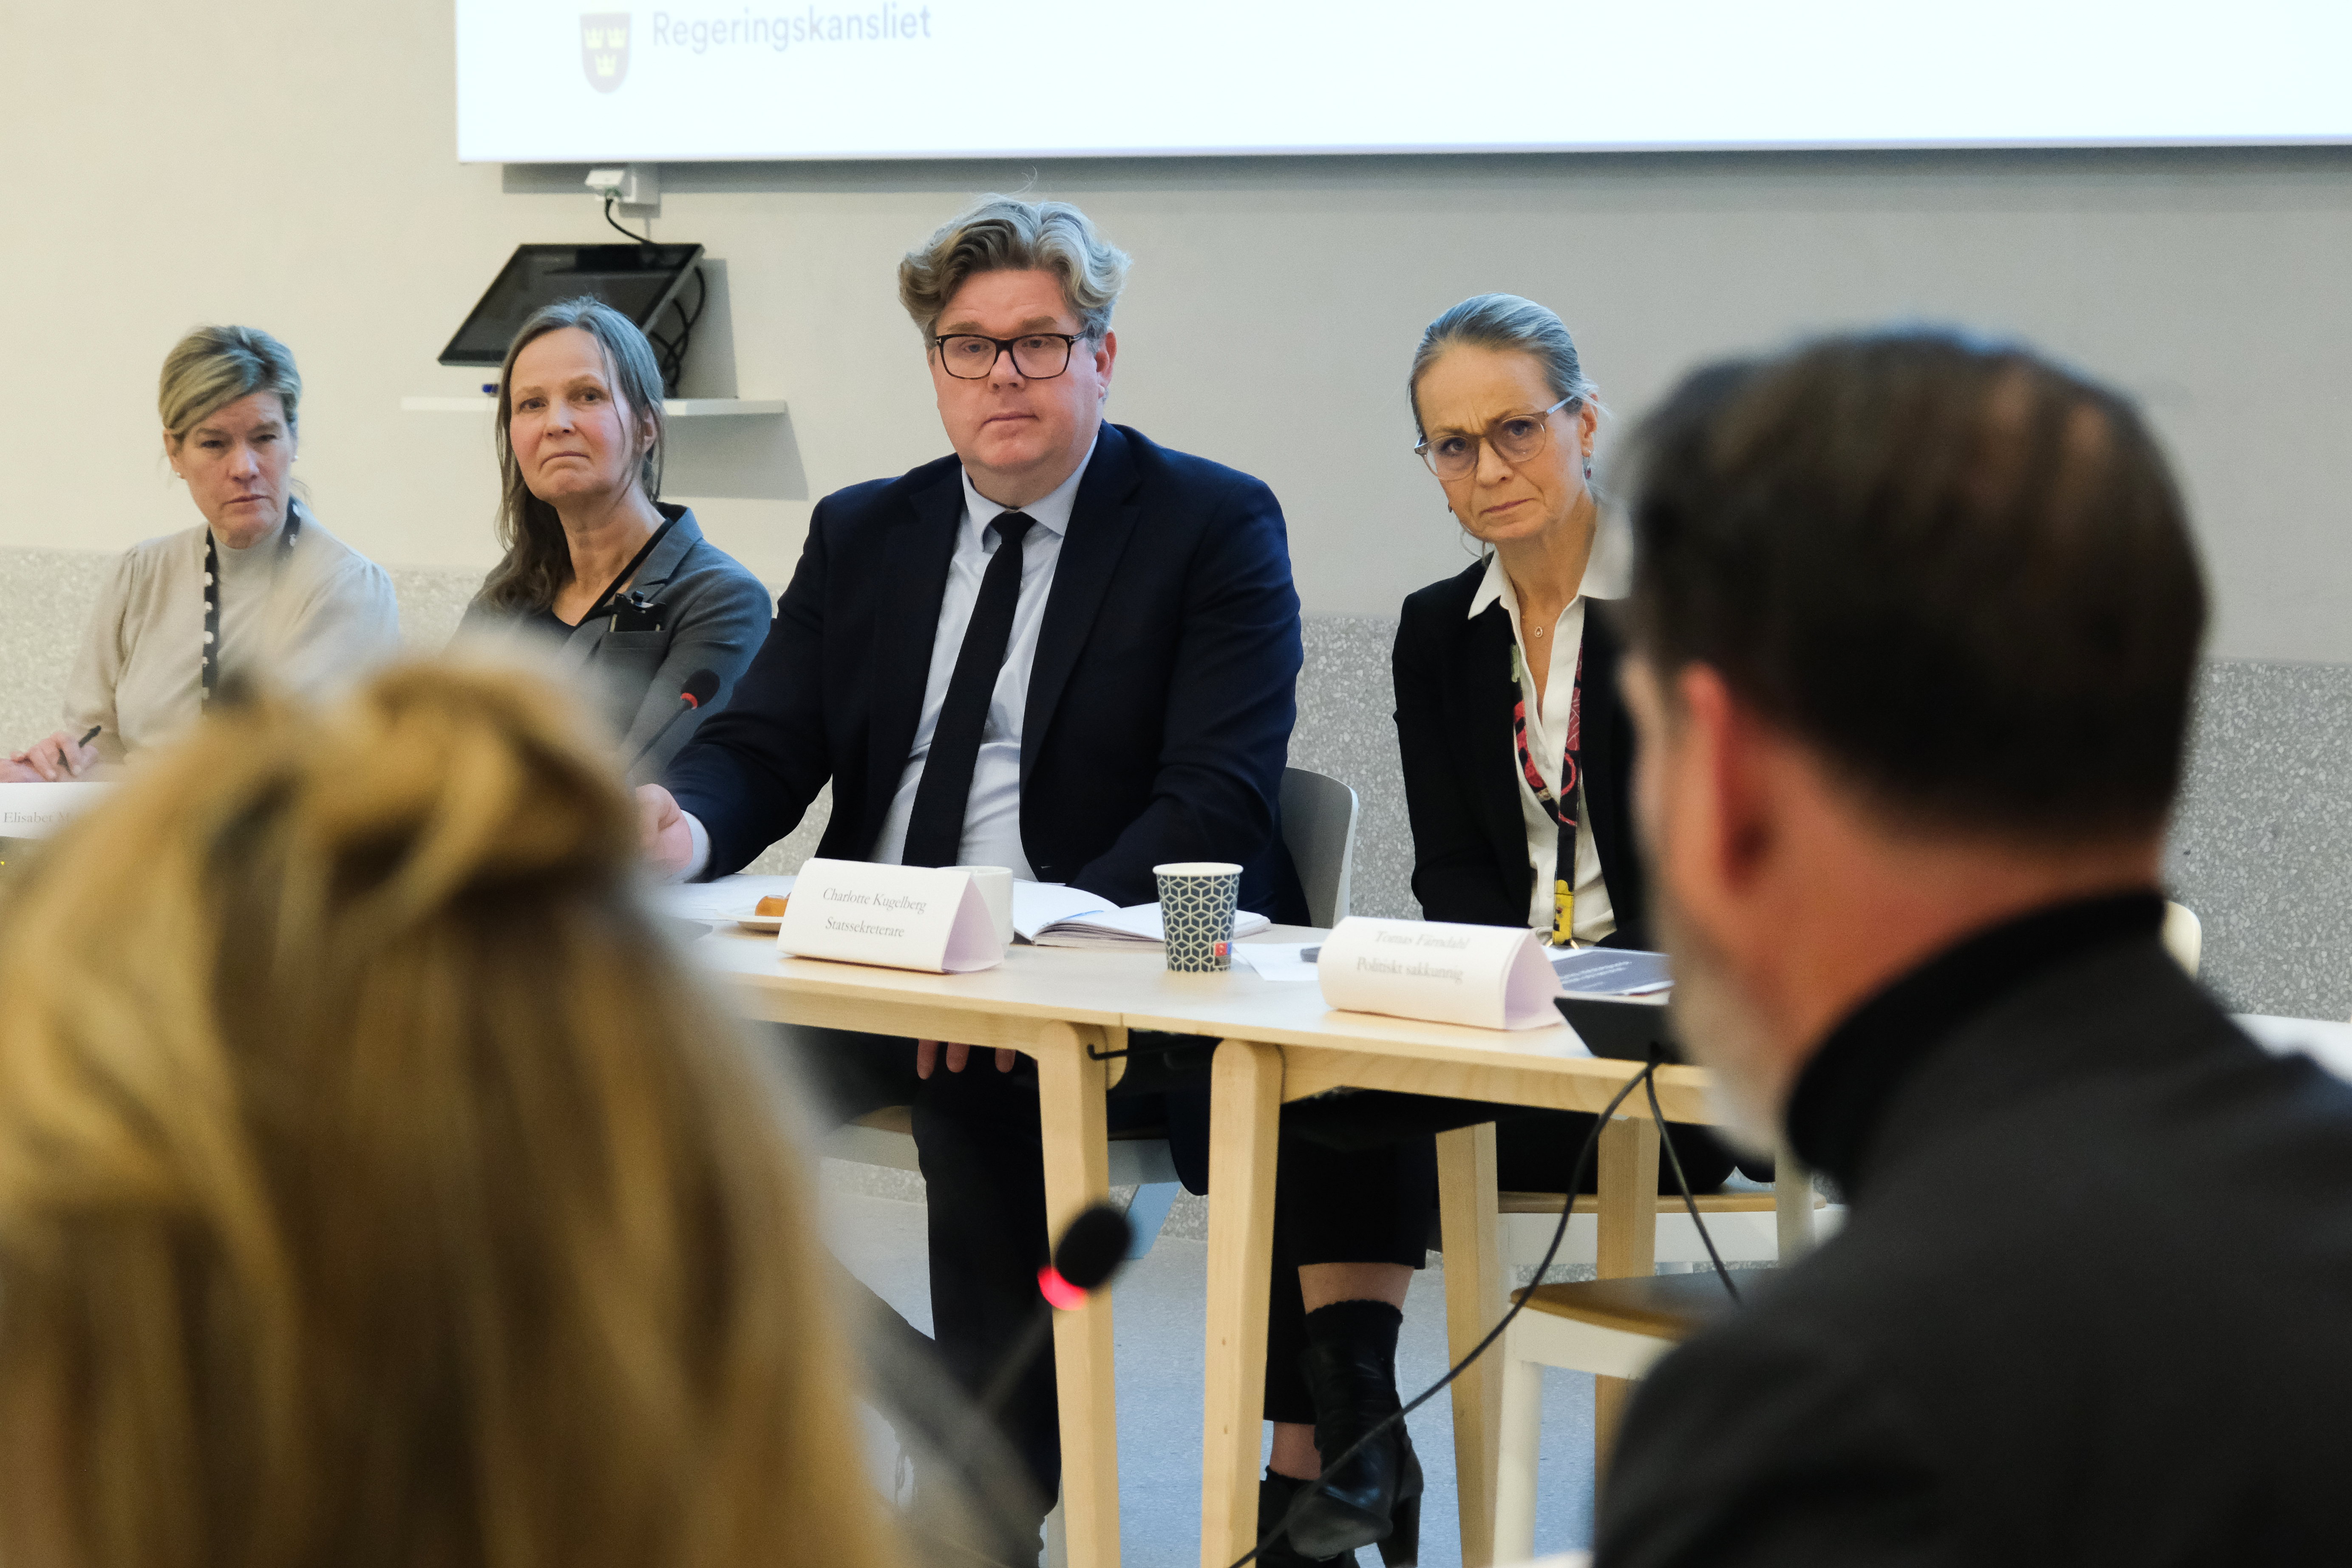 Minister for Justice Gunnar Strömmer and State Secretary Charlotte Kugelberg with ministry officials.